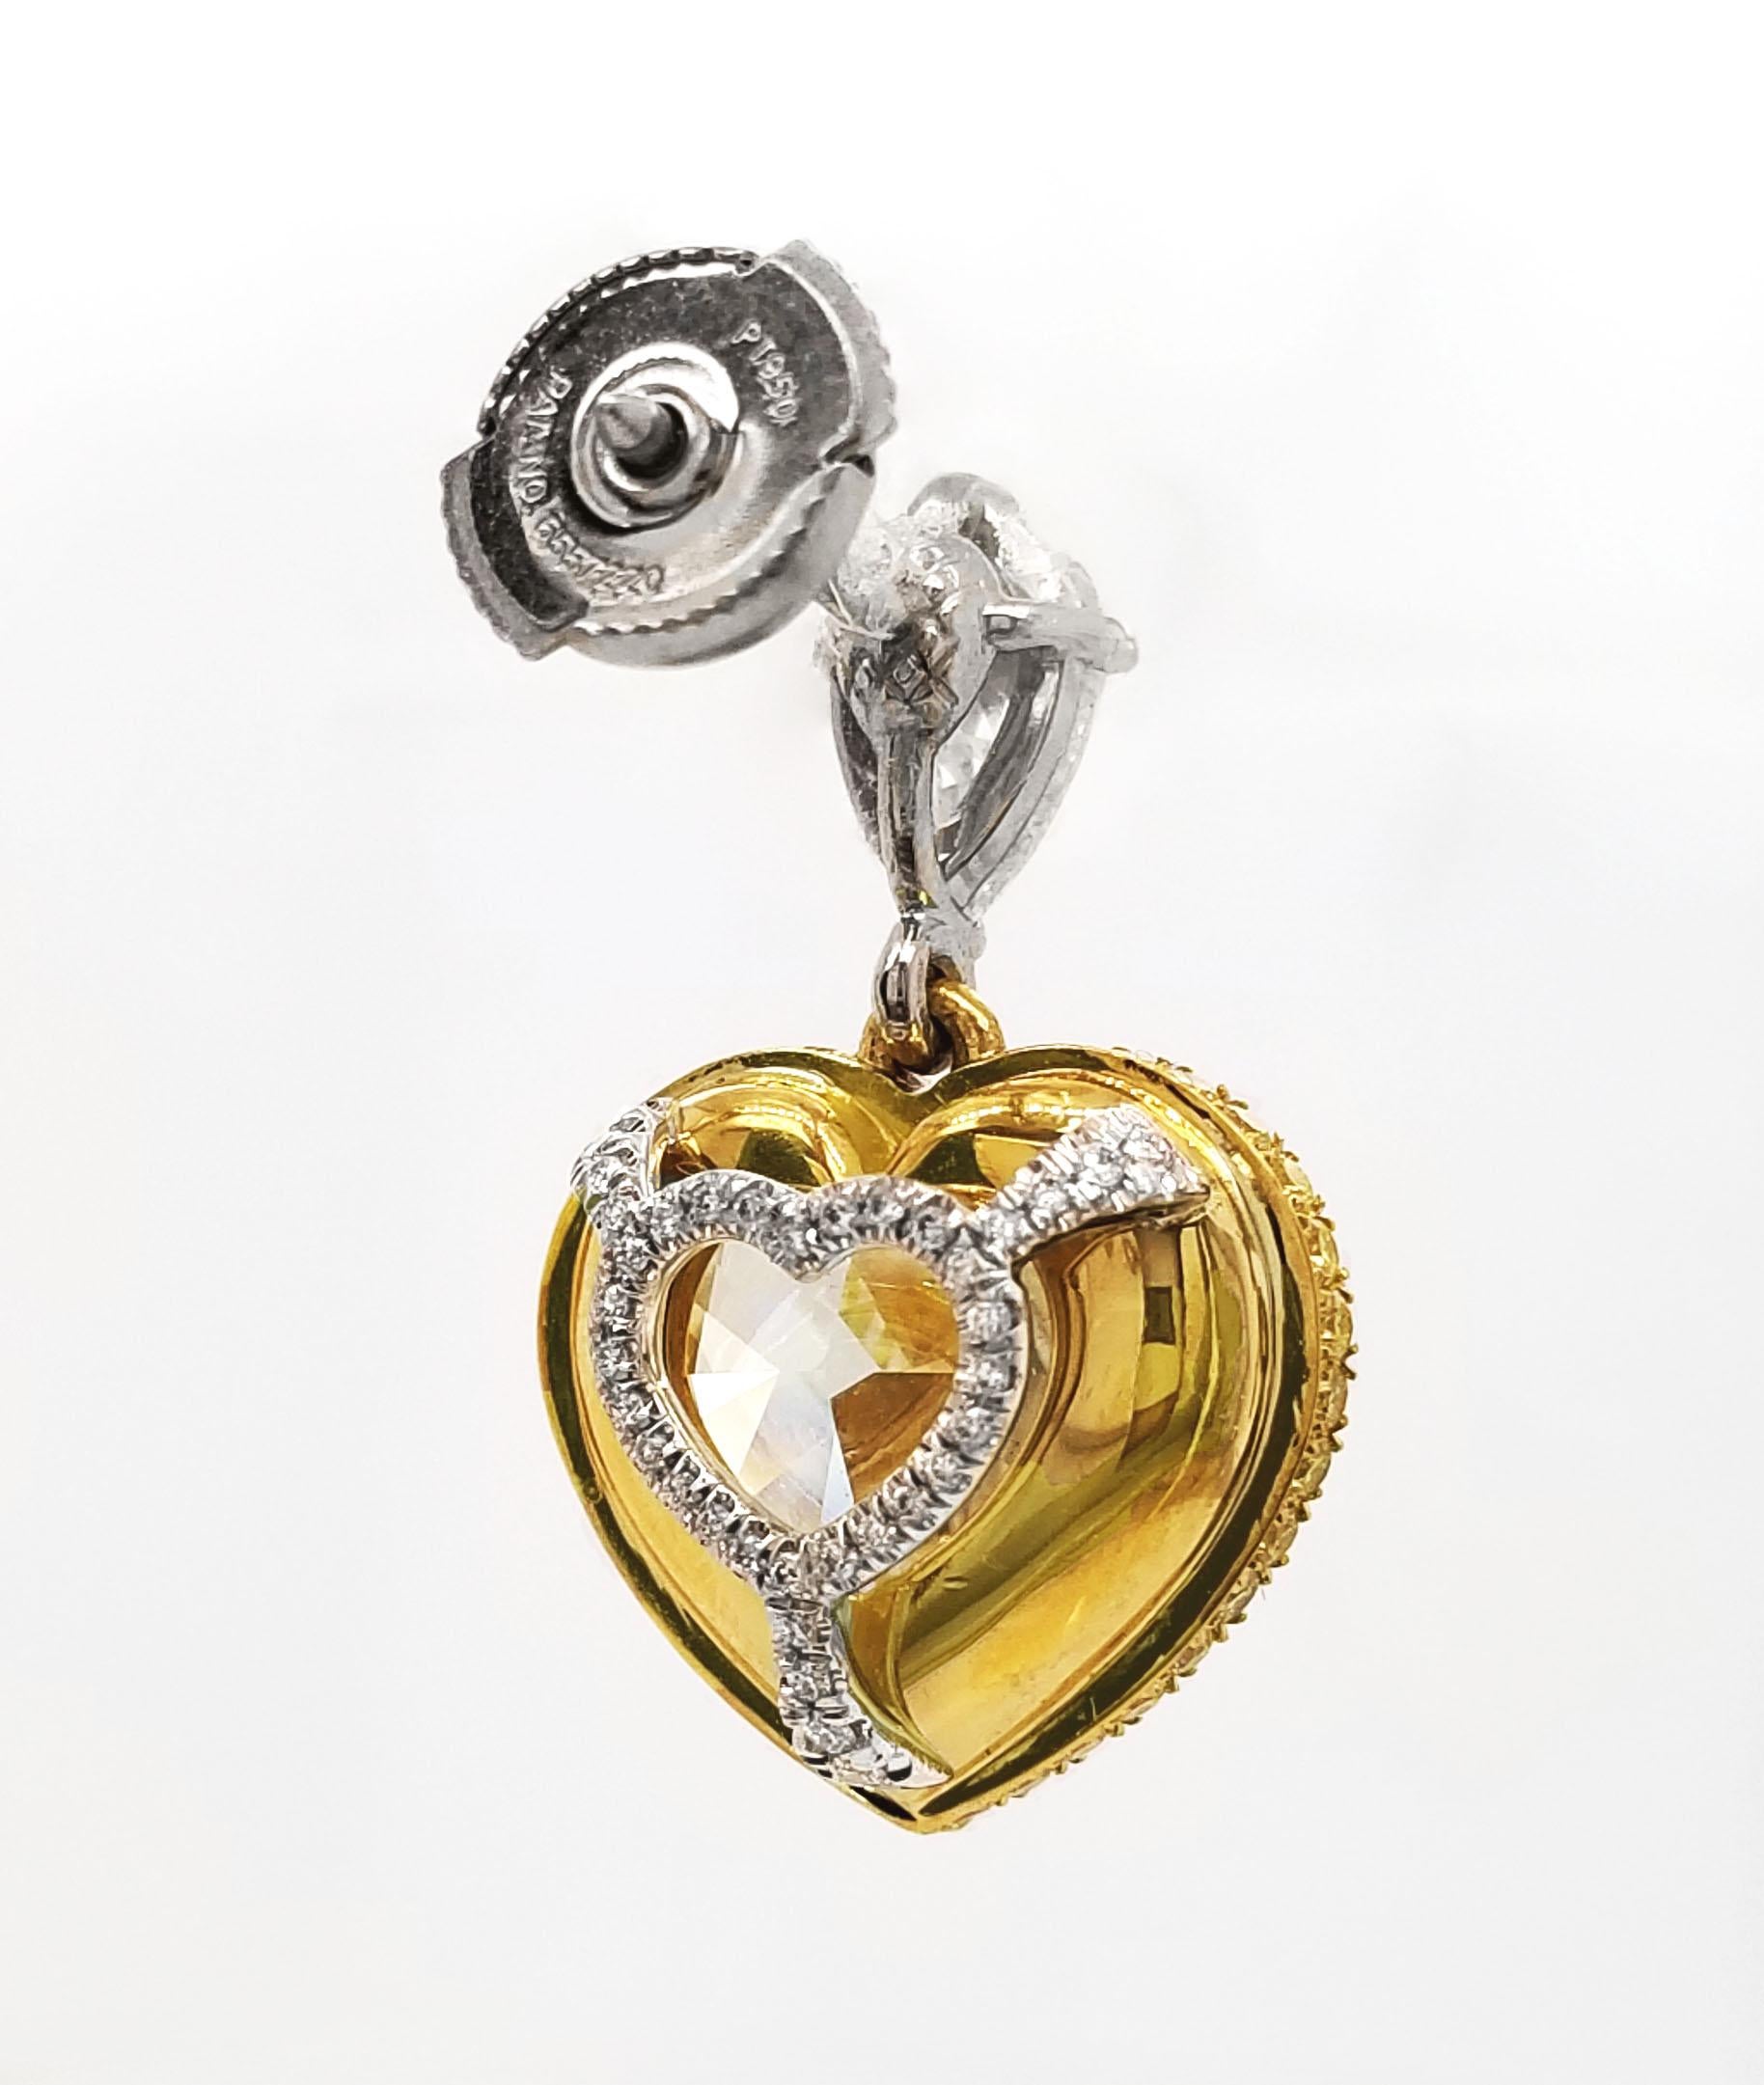 Contemporary Scarselli Dangle Heart Earrings with 6 Carat Fancy Light Yellow Diamonds